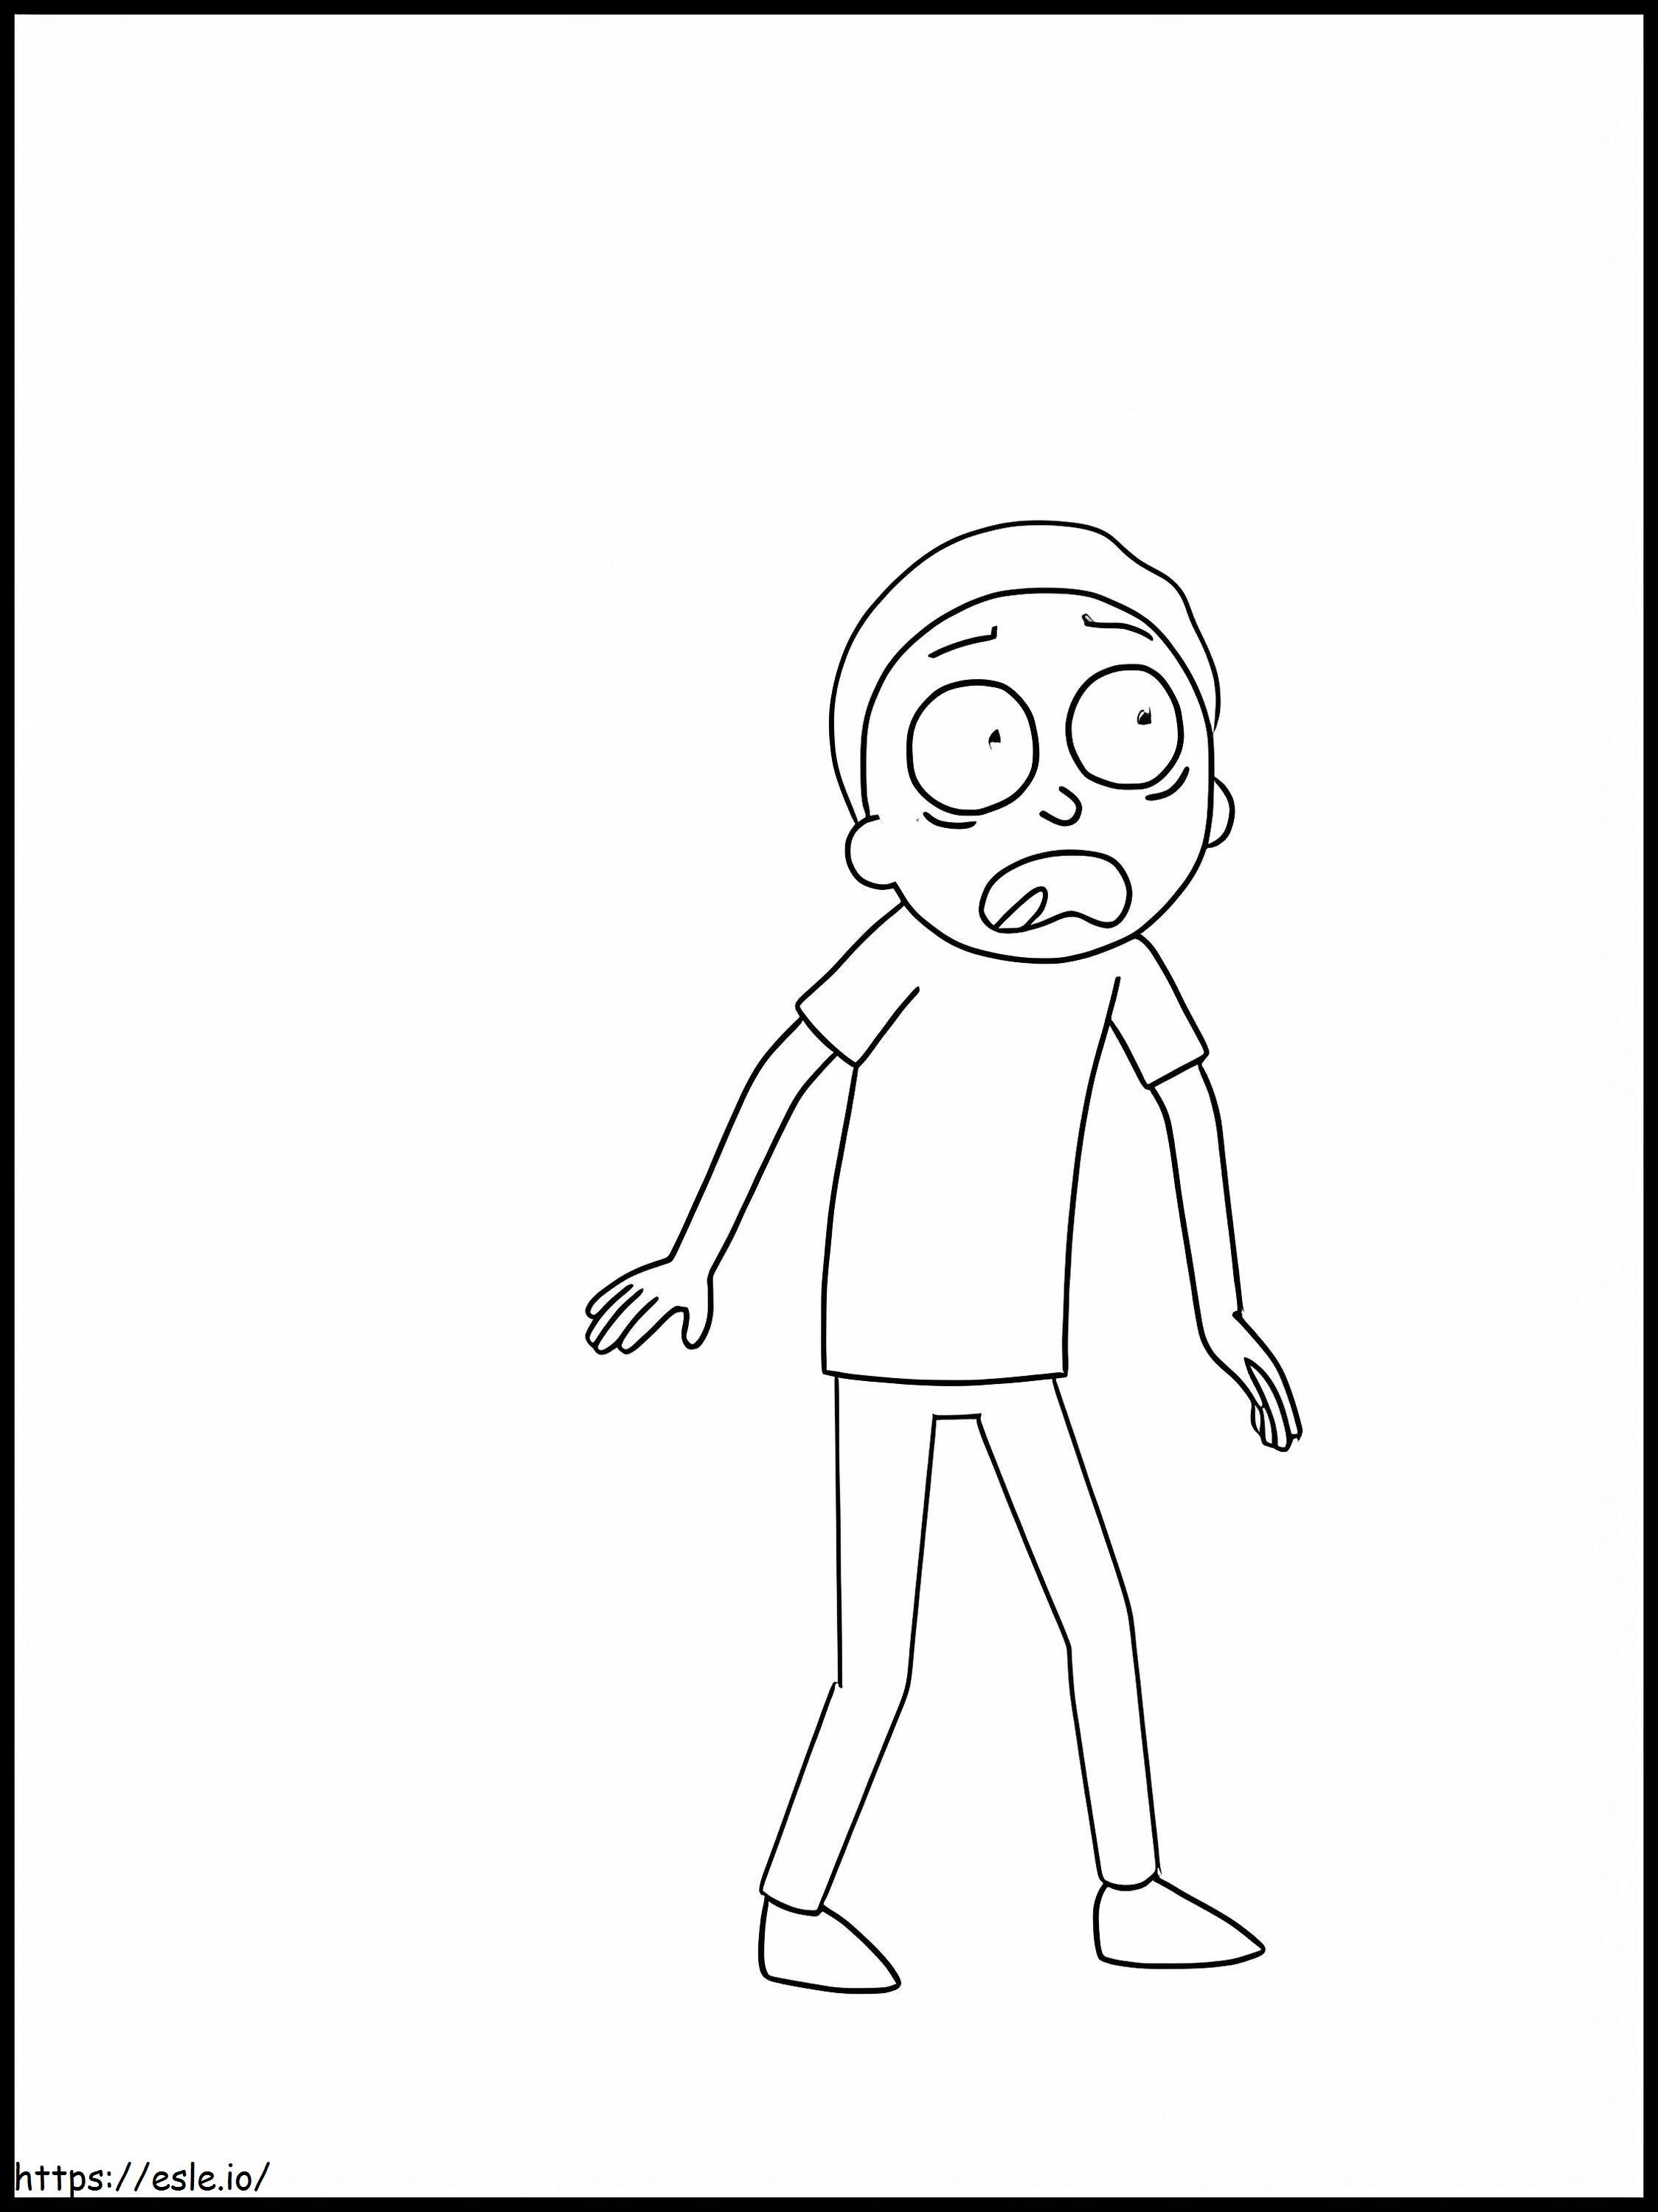 Scared Morty Smith coloring page